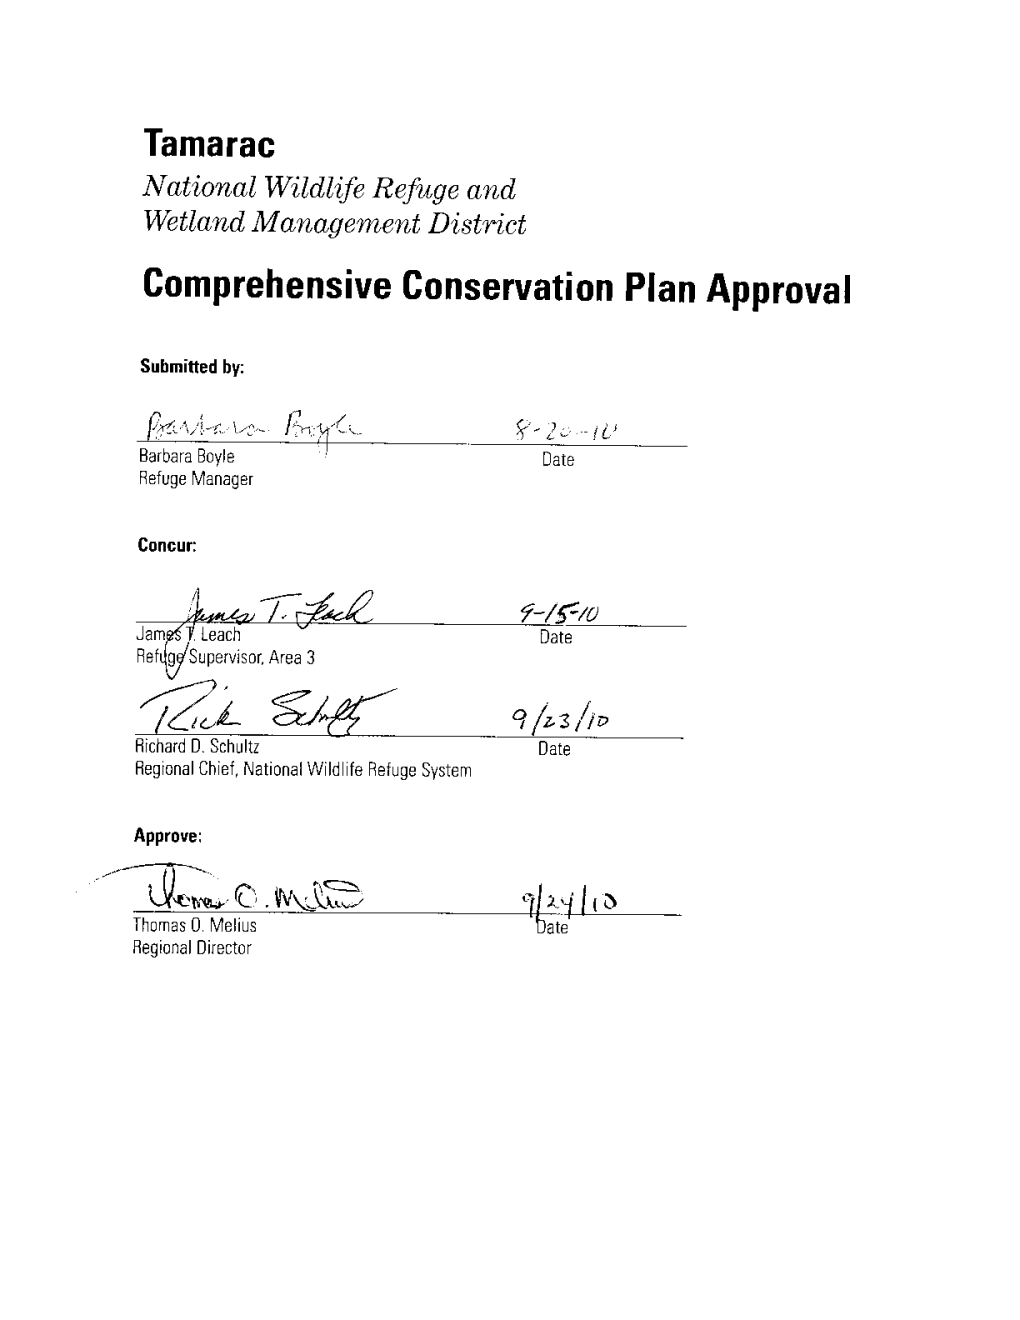 Comprehensive Conservation Plan Table of Contents